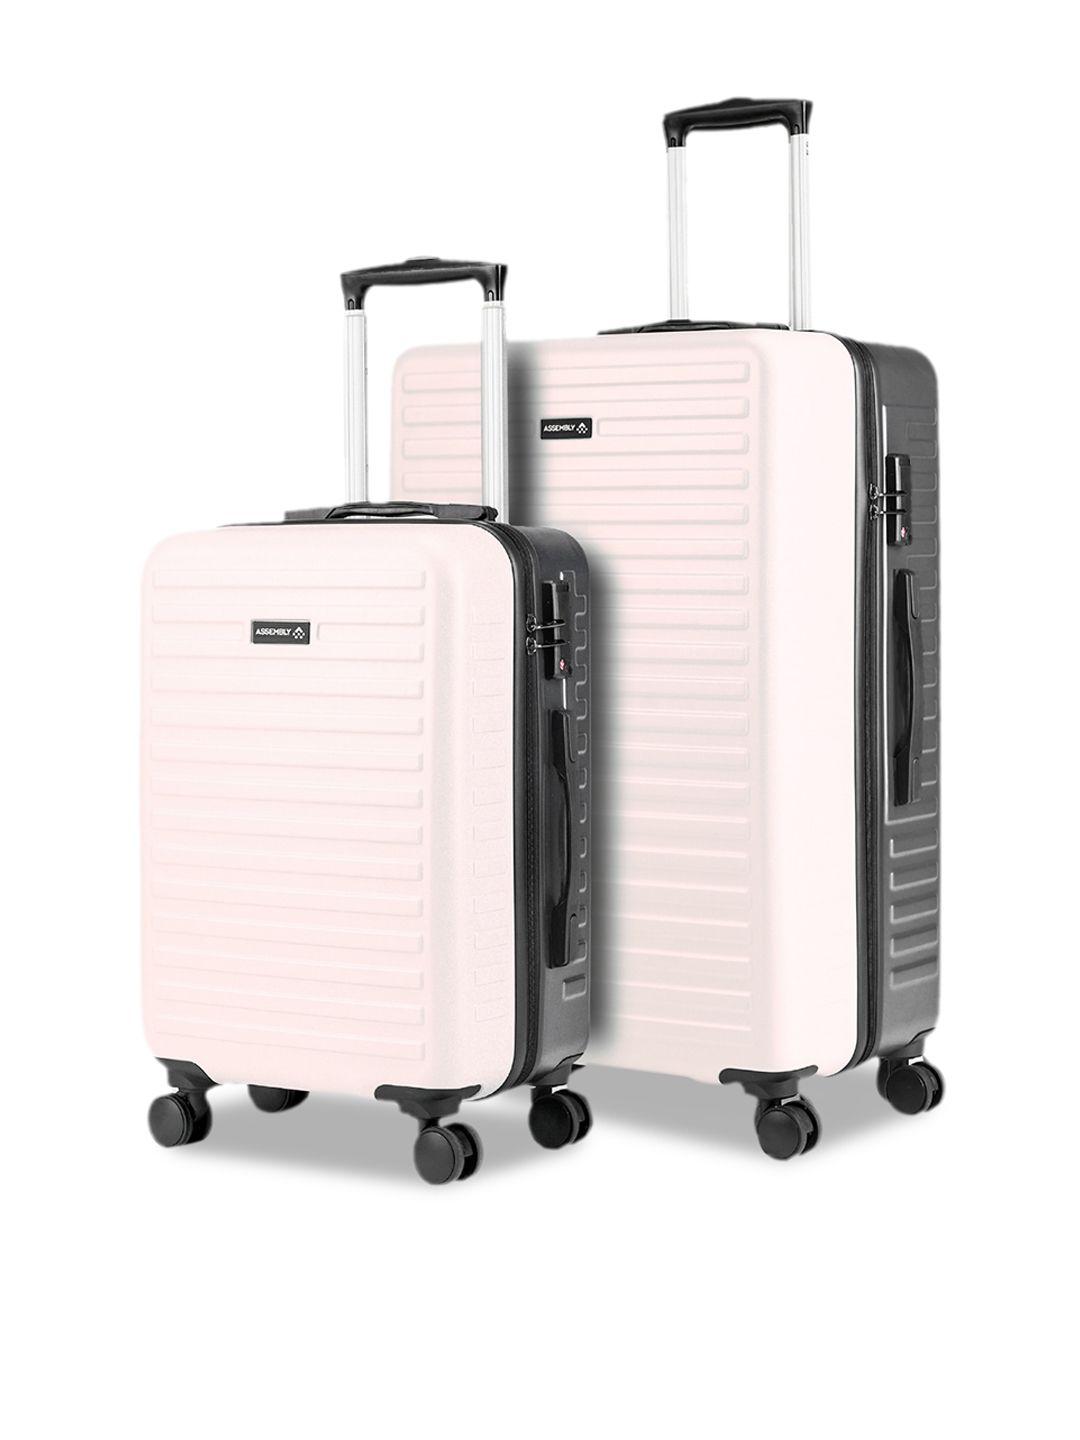 assembly set of 2 textured hard-sided trolley suitcases